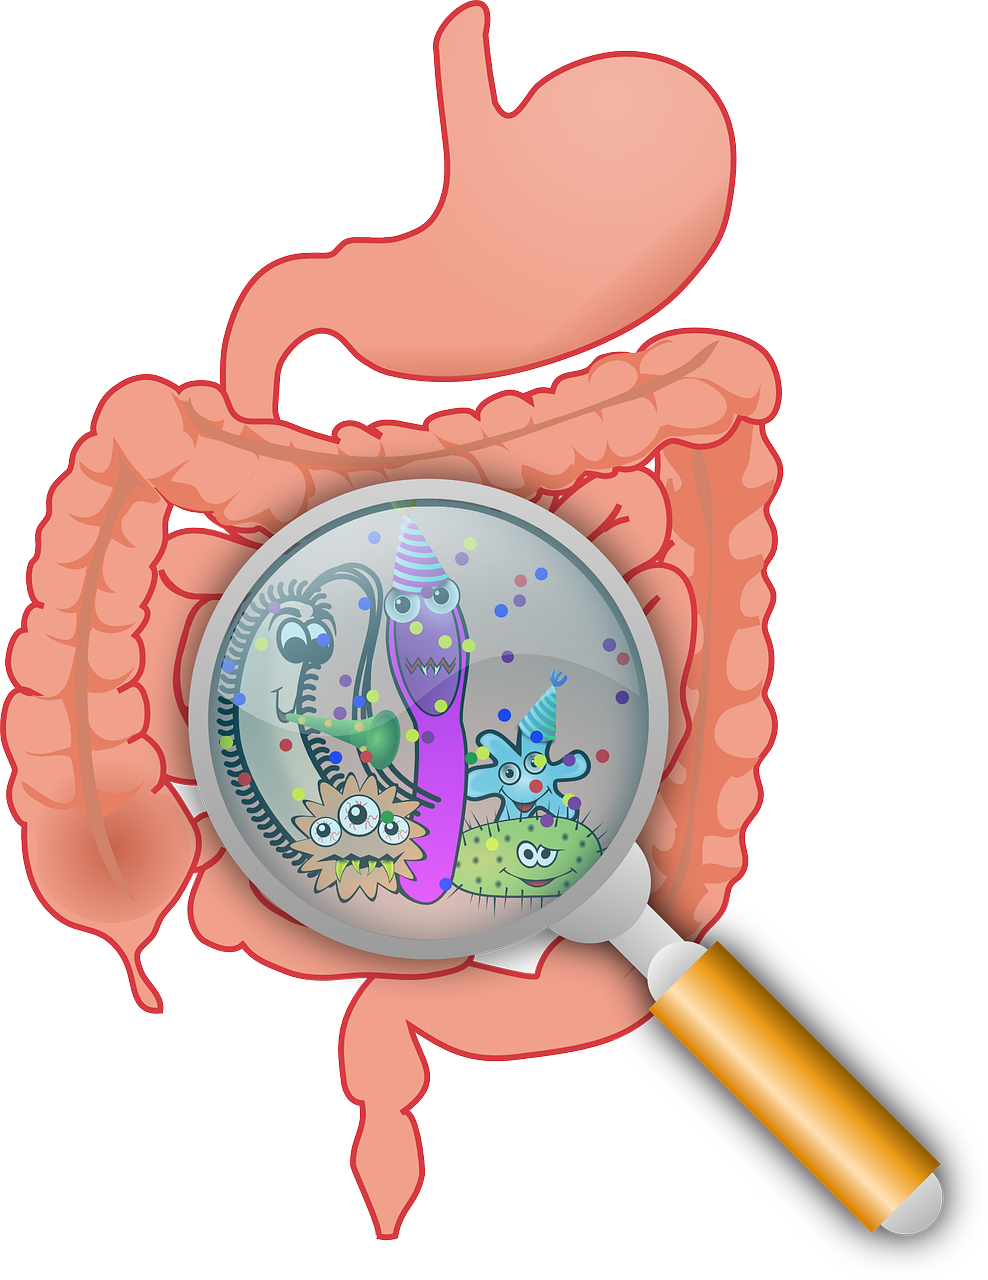 And the gut microbiome. Weight clipart obesity